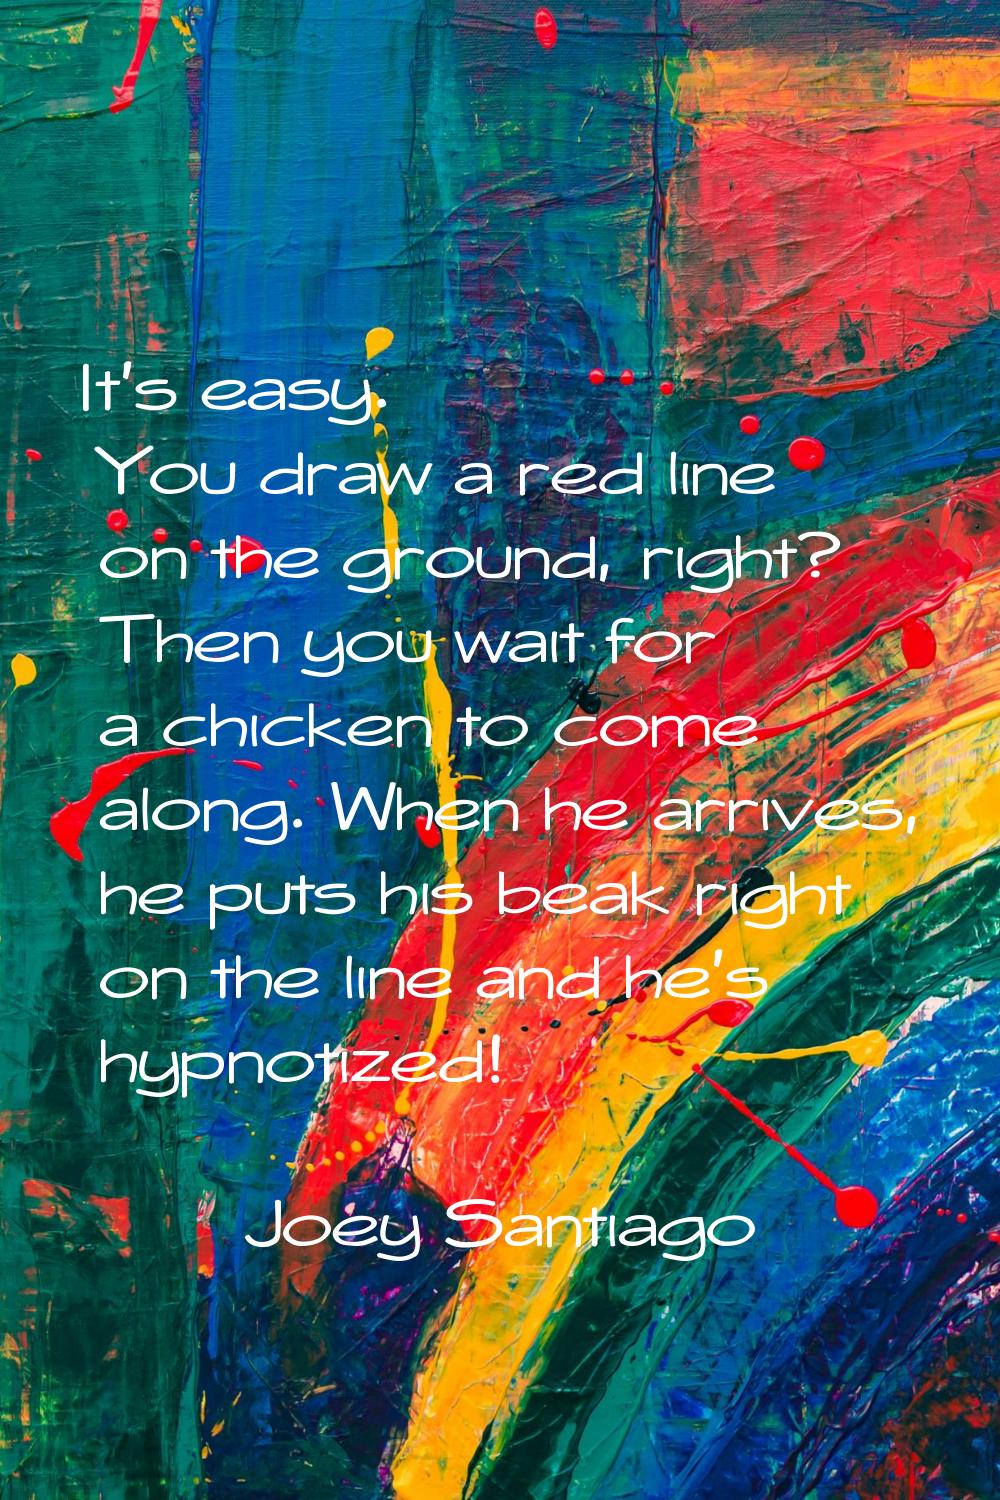 It's easy. You draw a red line on the ground, right? Then you wait for a chicken to come along. Whe